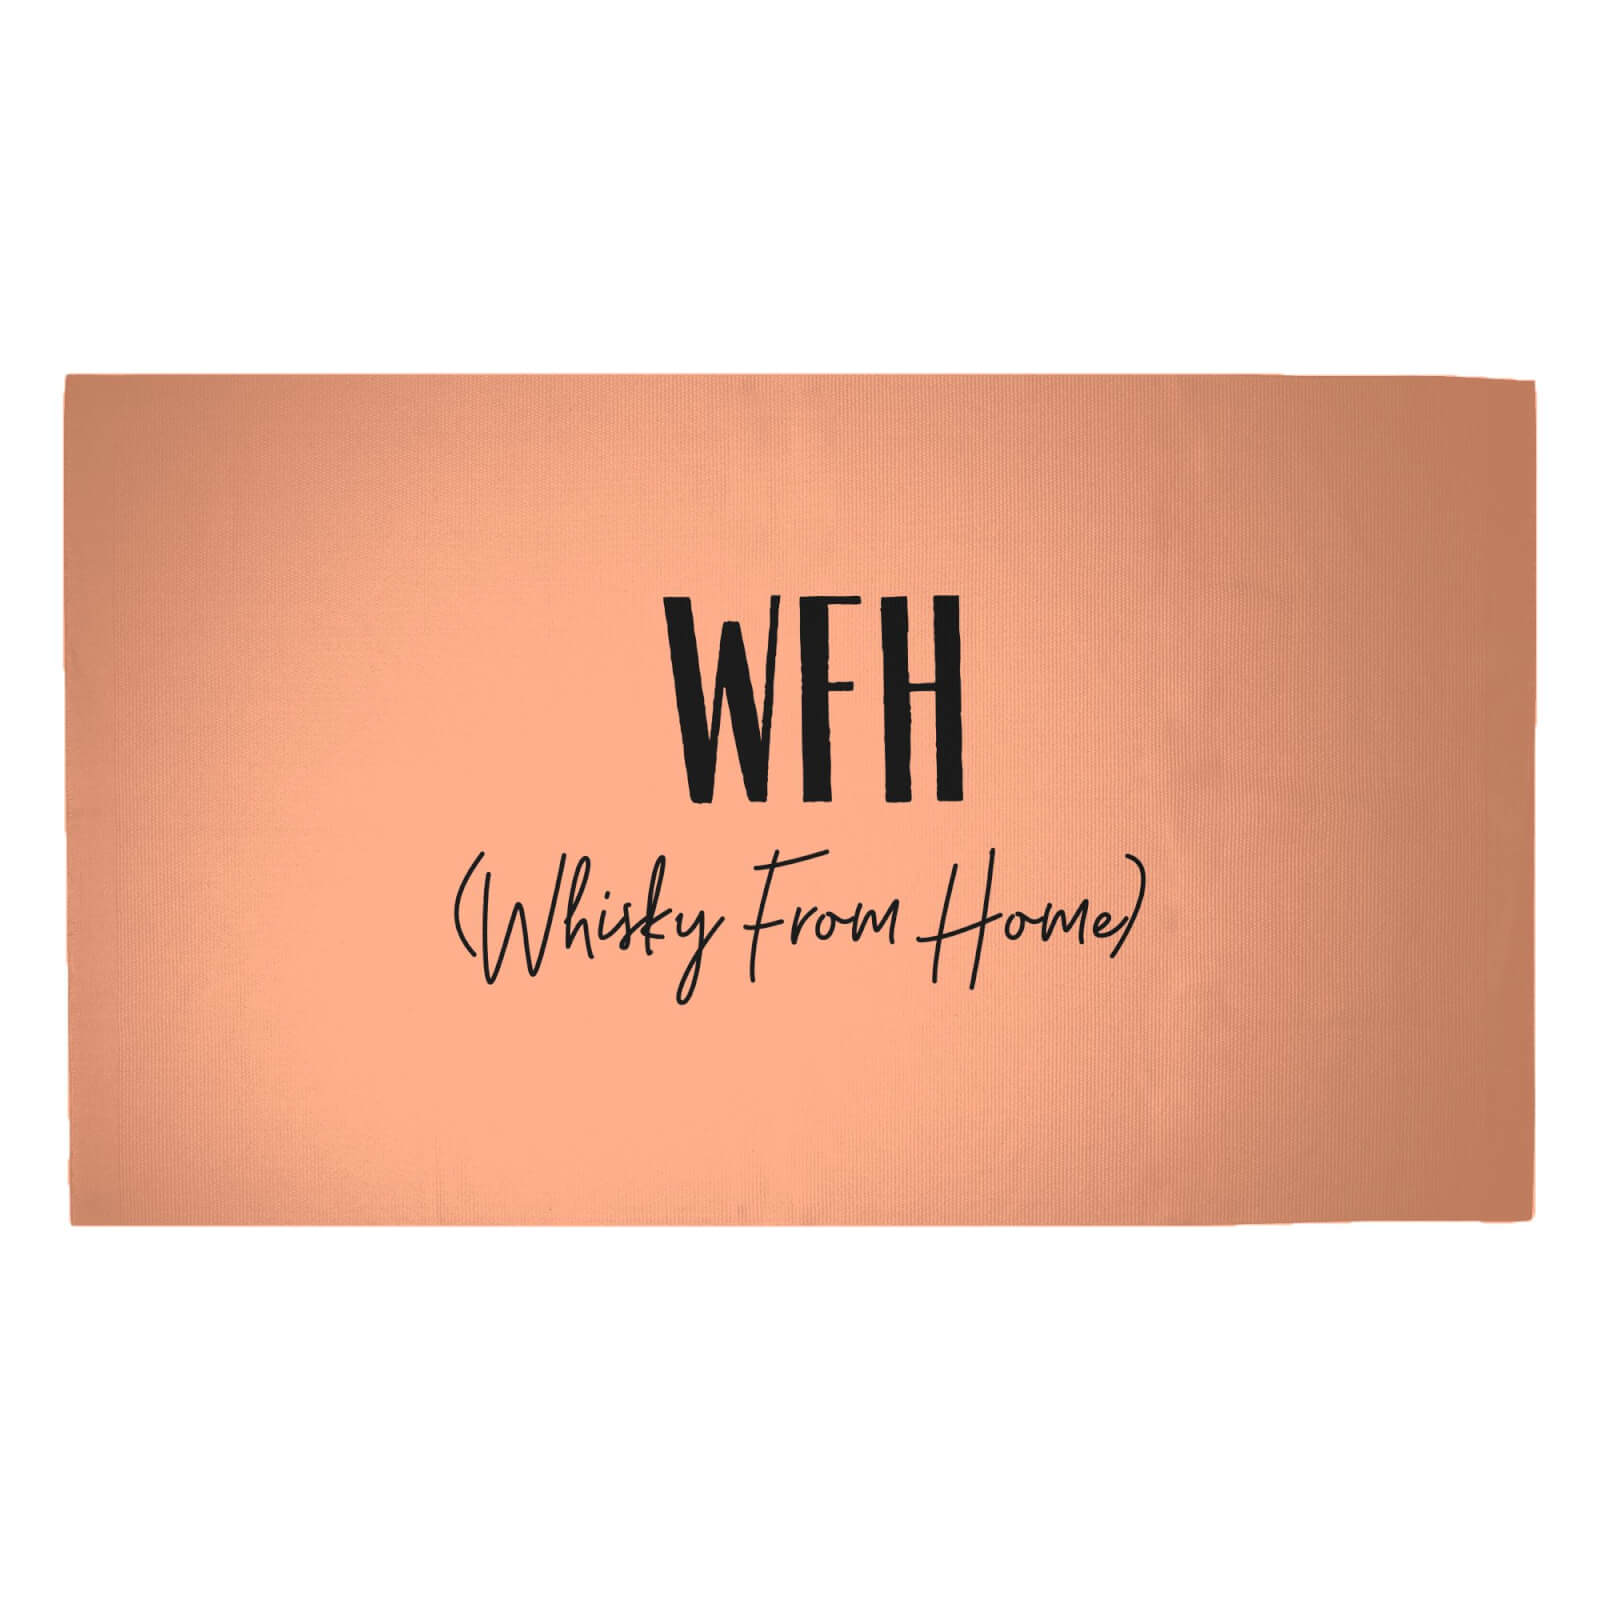 WFH - Whisky From Home Woven Rug - Medium